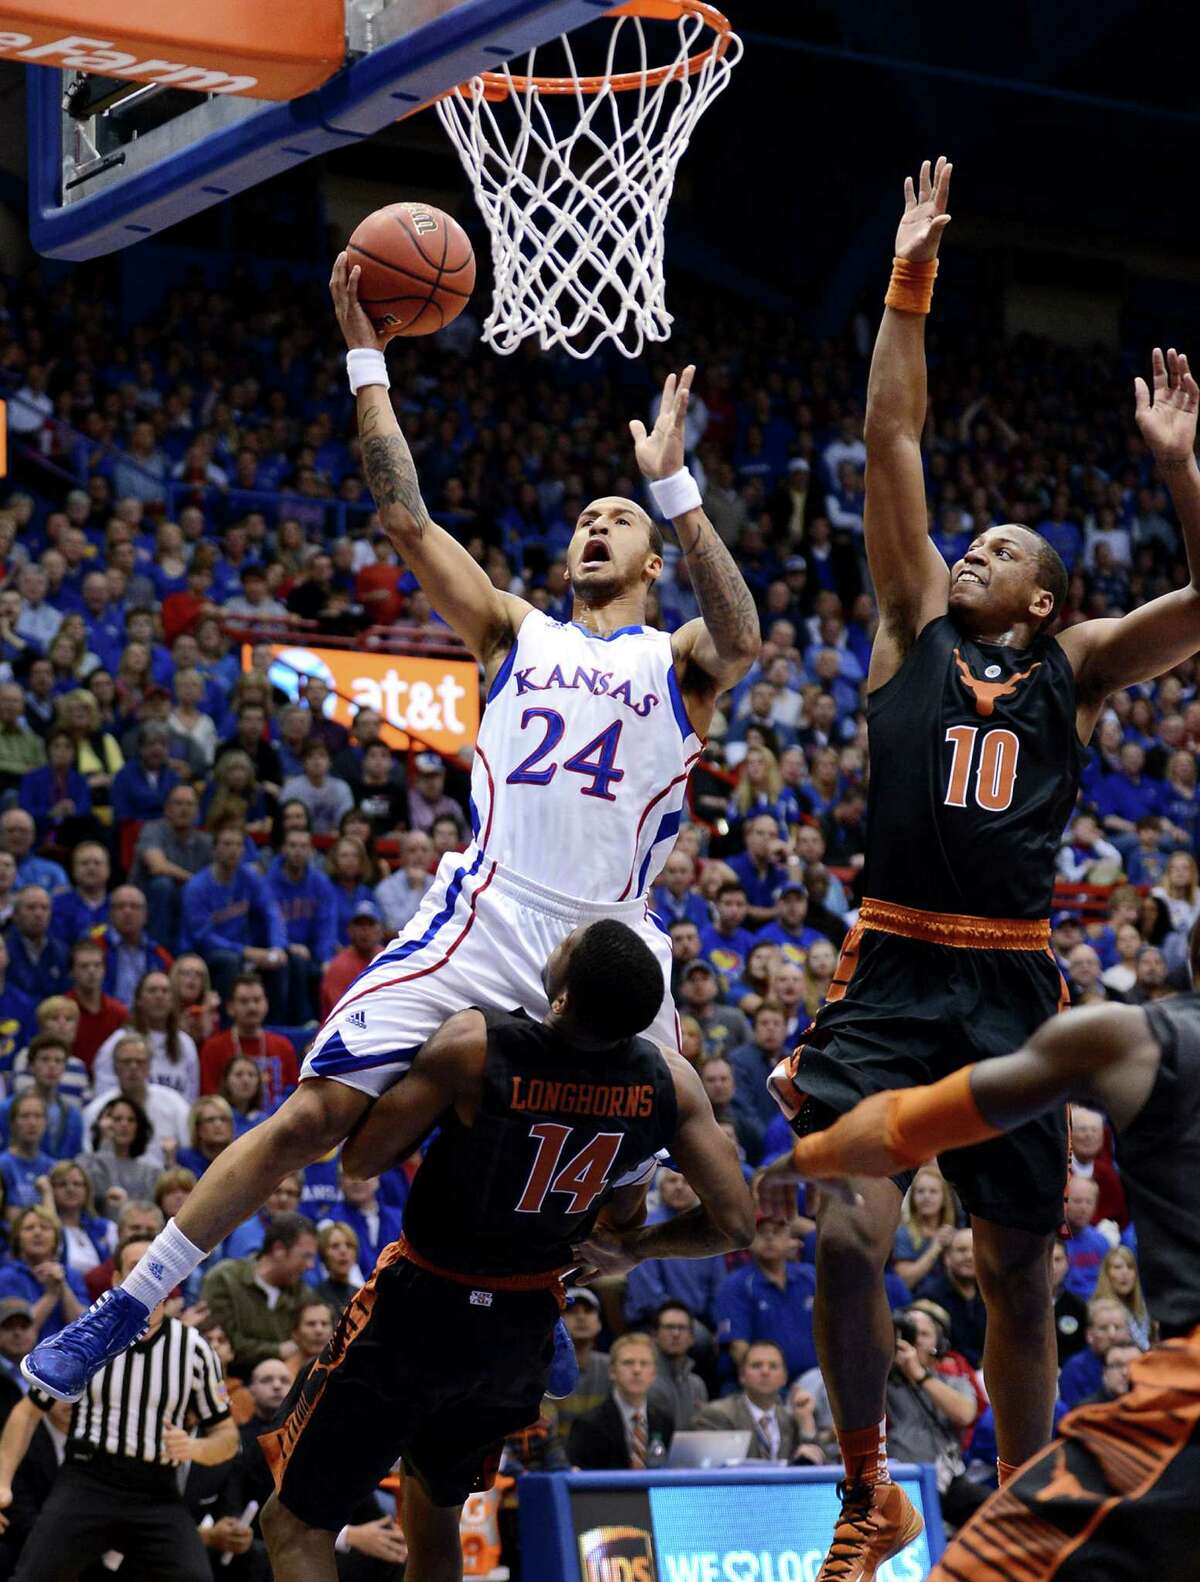 Kansas' Travis Releford soars in for a layup past Texas' Jonathan Holmes (right) and over Julien Lewis during the first half at Allen Fieldhouse on Saturday. Releford finished with a game-high 15 points.